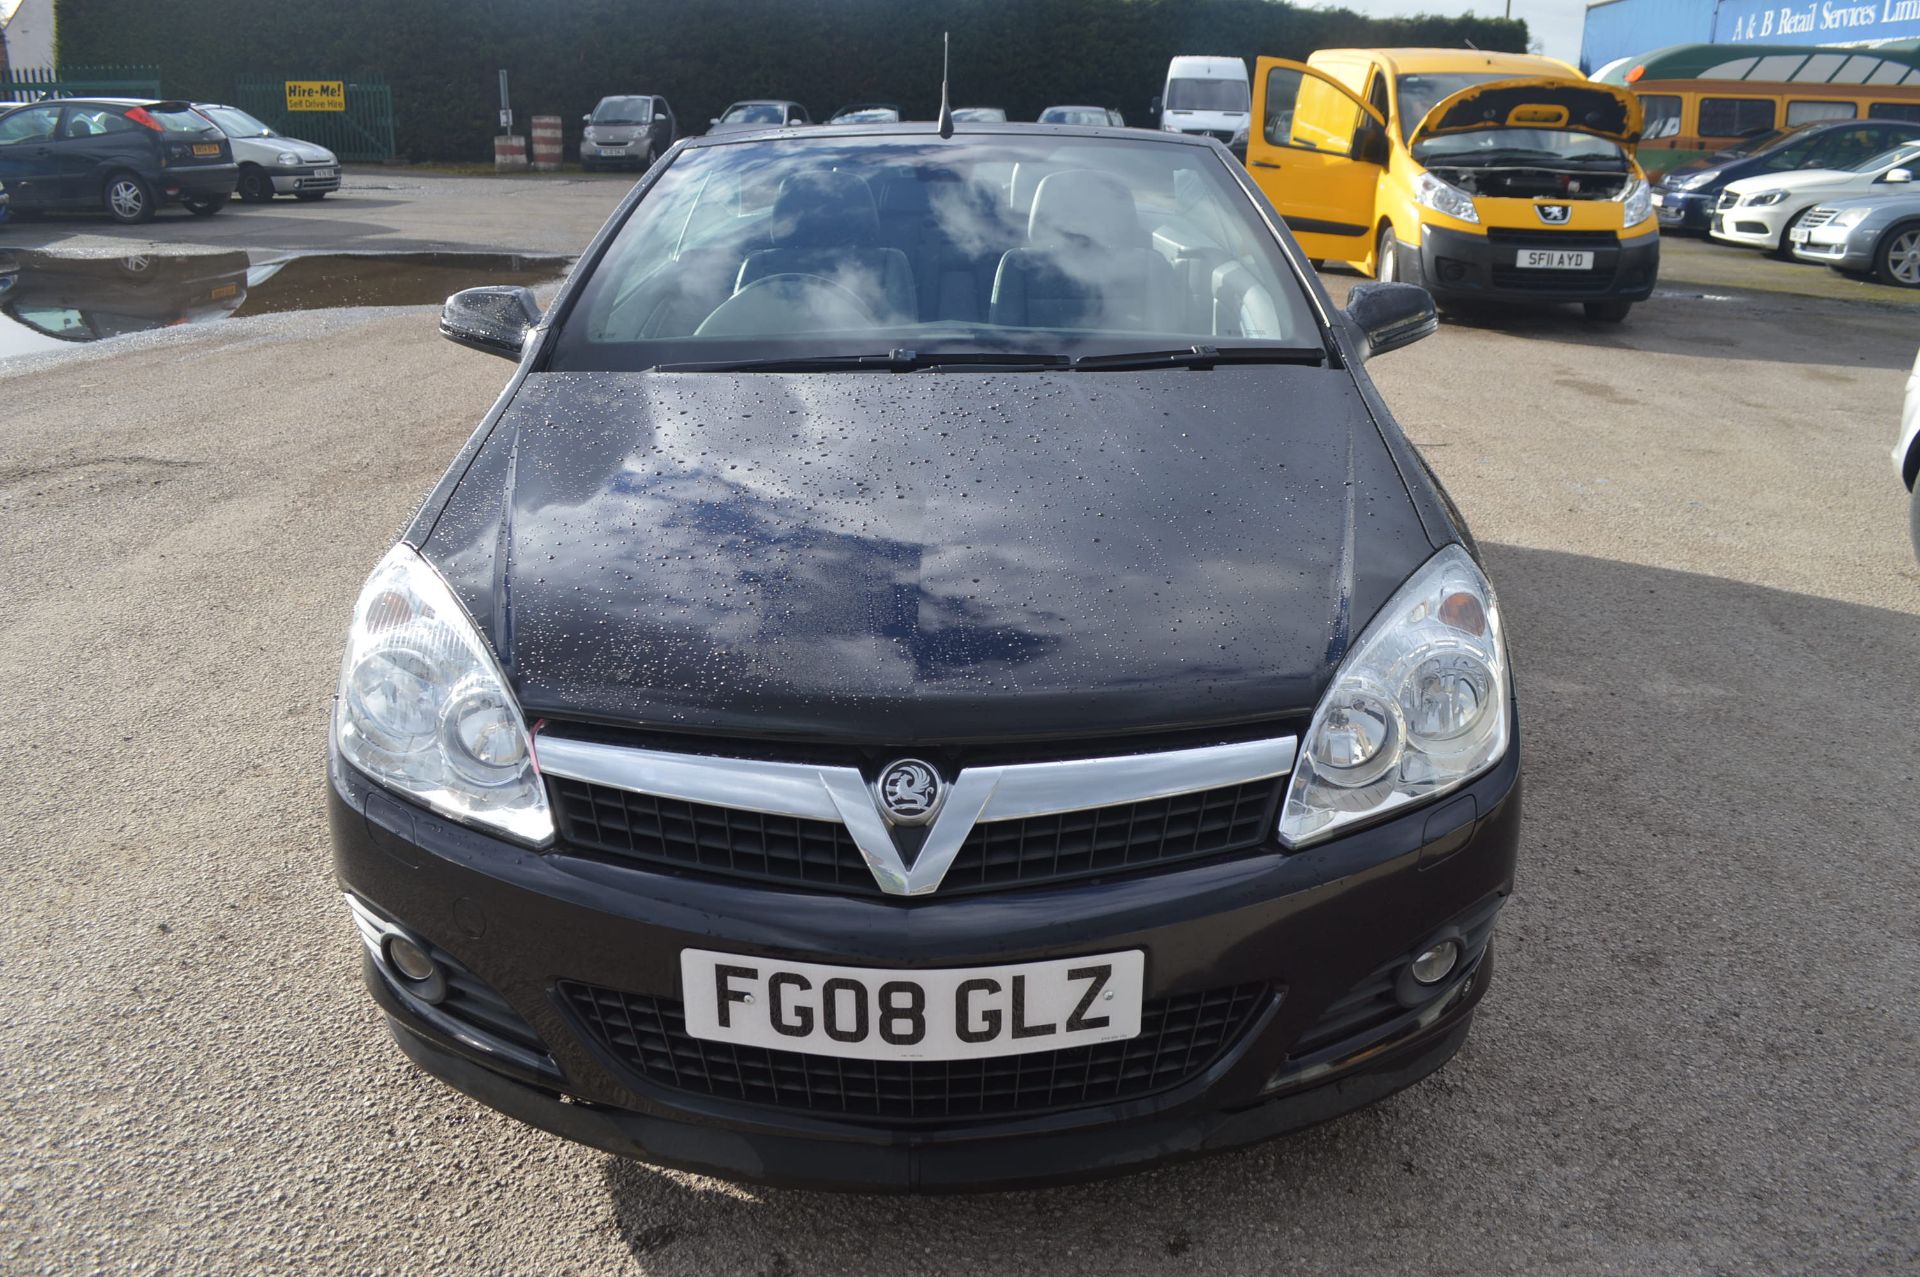 K - 2008/08 REG VAUXHALL ASTRA T-TOP DESIGN CDTI - ROOF CAN BE PUT DOWN/UP WITH THE KEY   DATE OF - Image 2 of 20